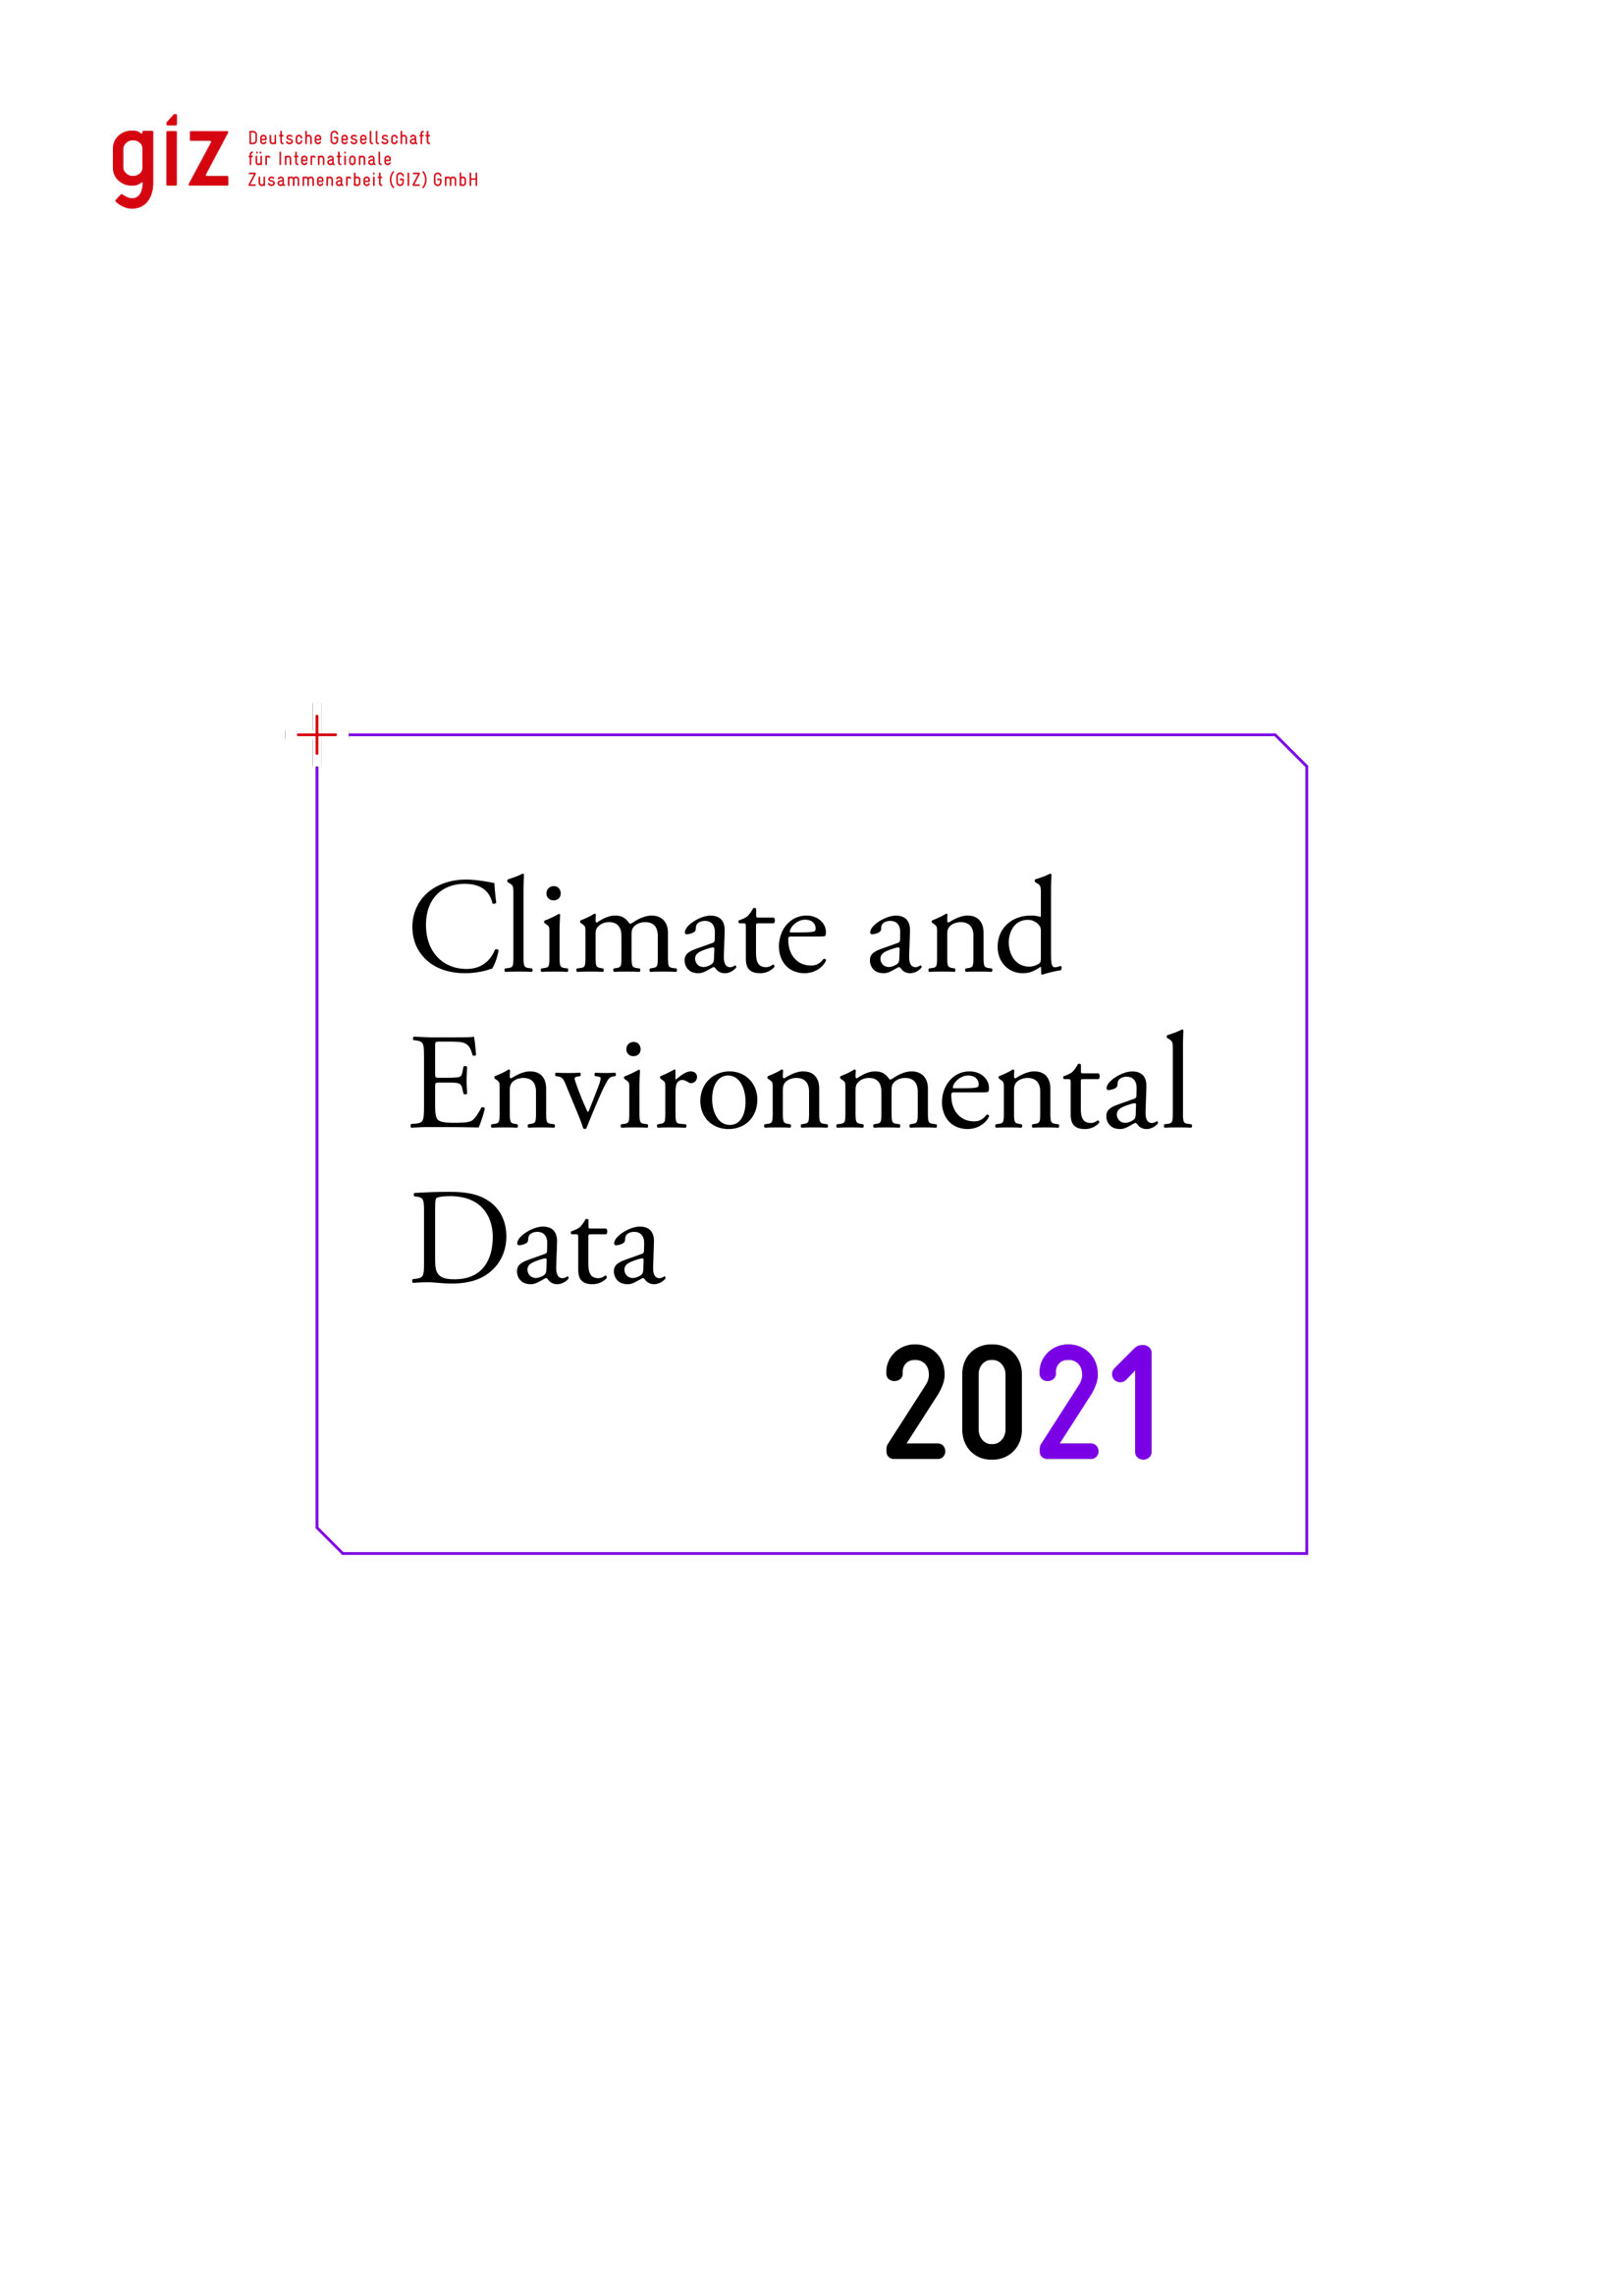 Climate and environmental data 2021